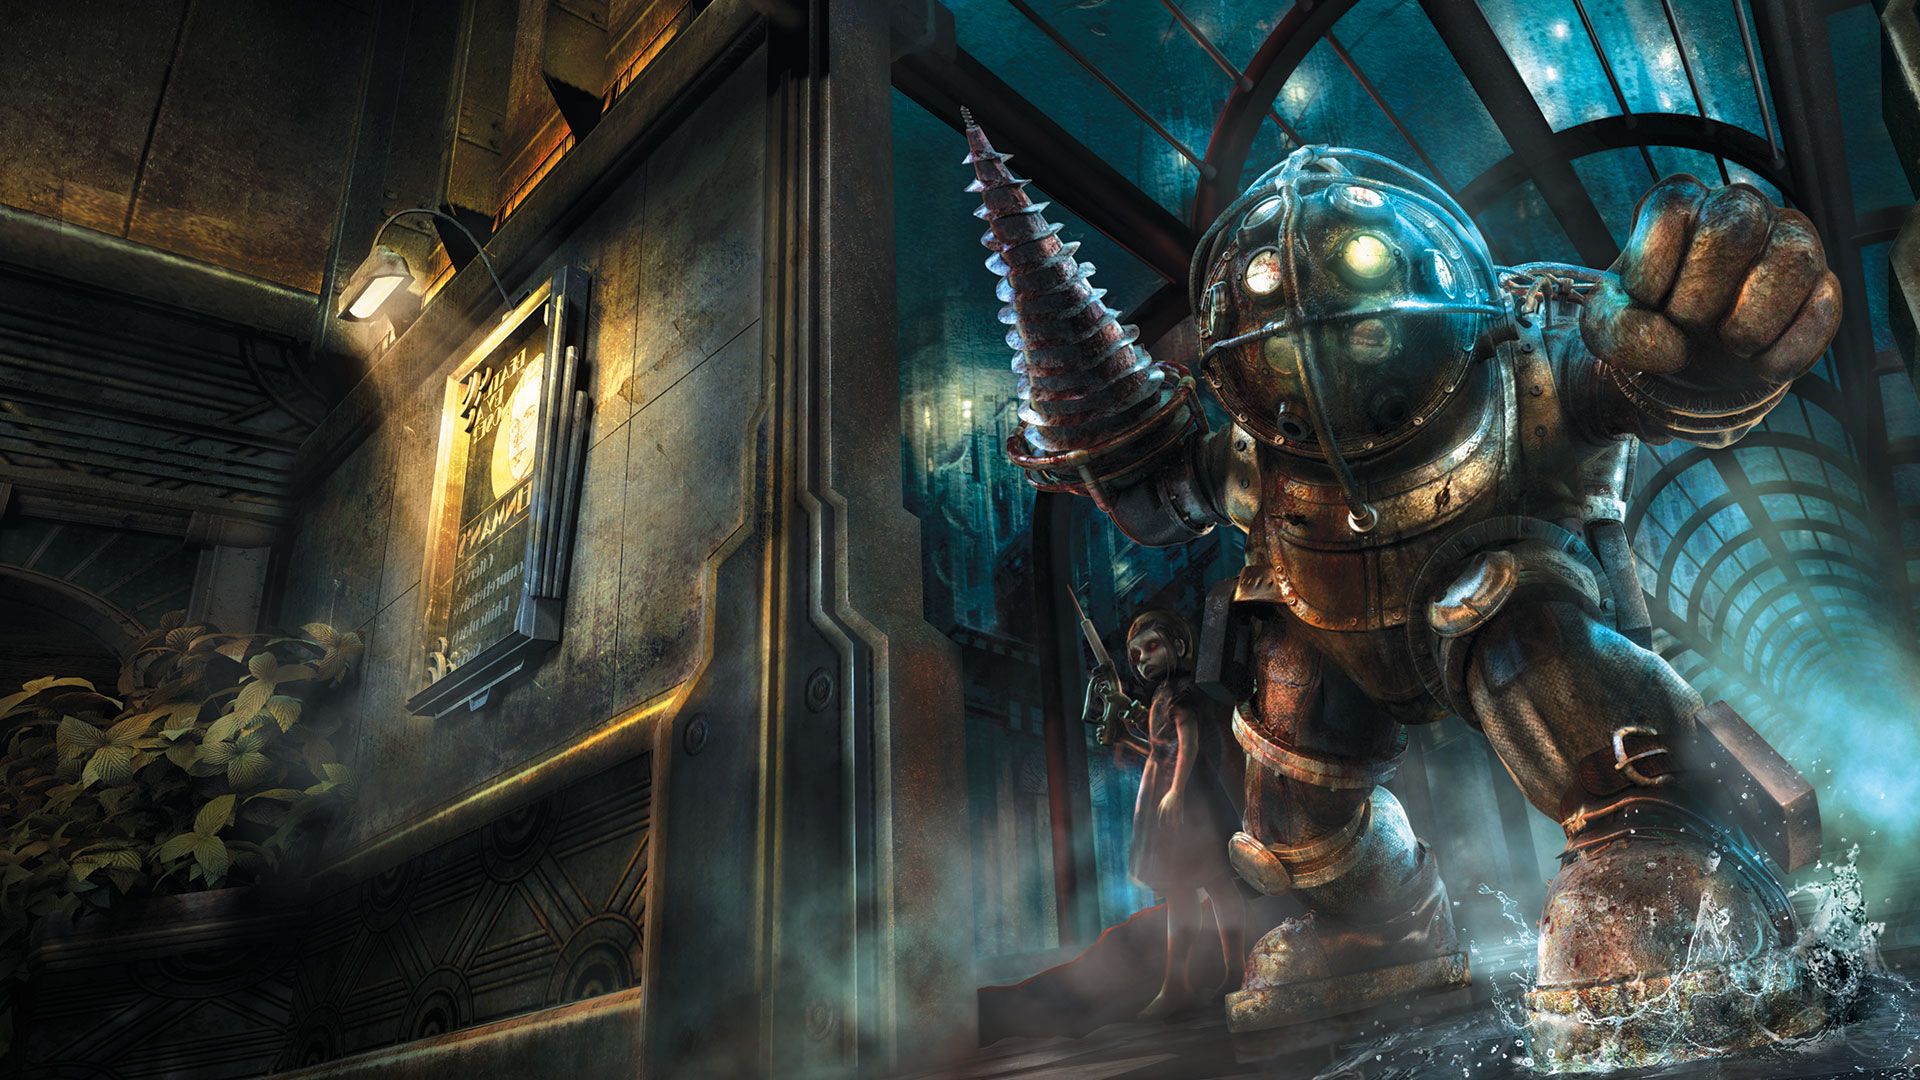 BioShock 4: Everything we know so far about the new BioShock game